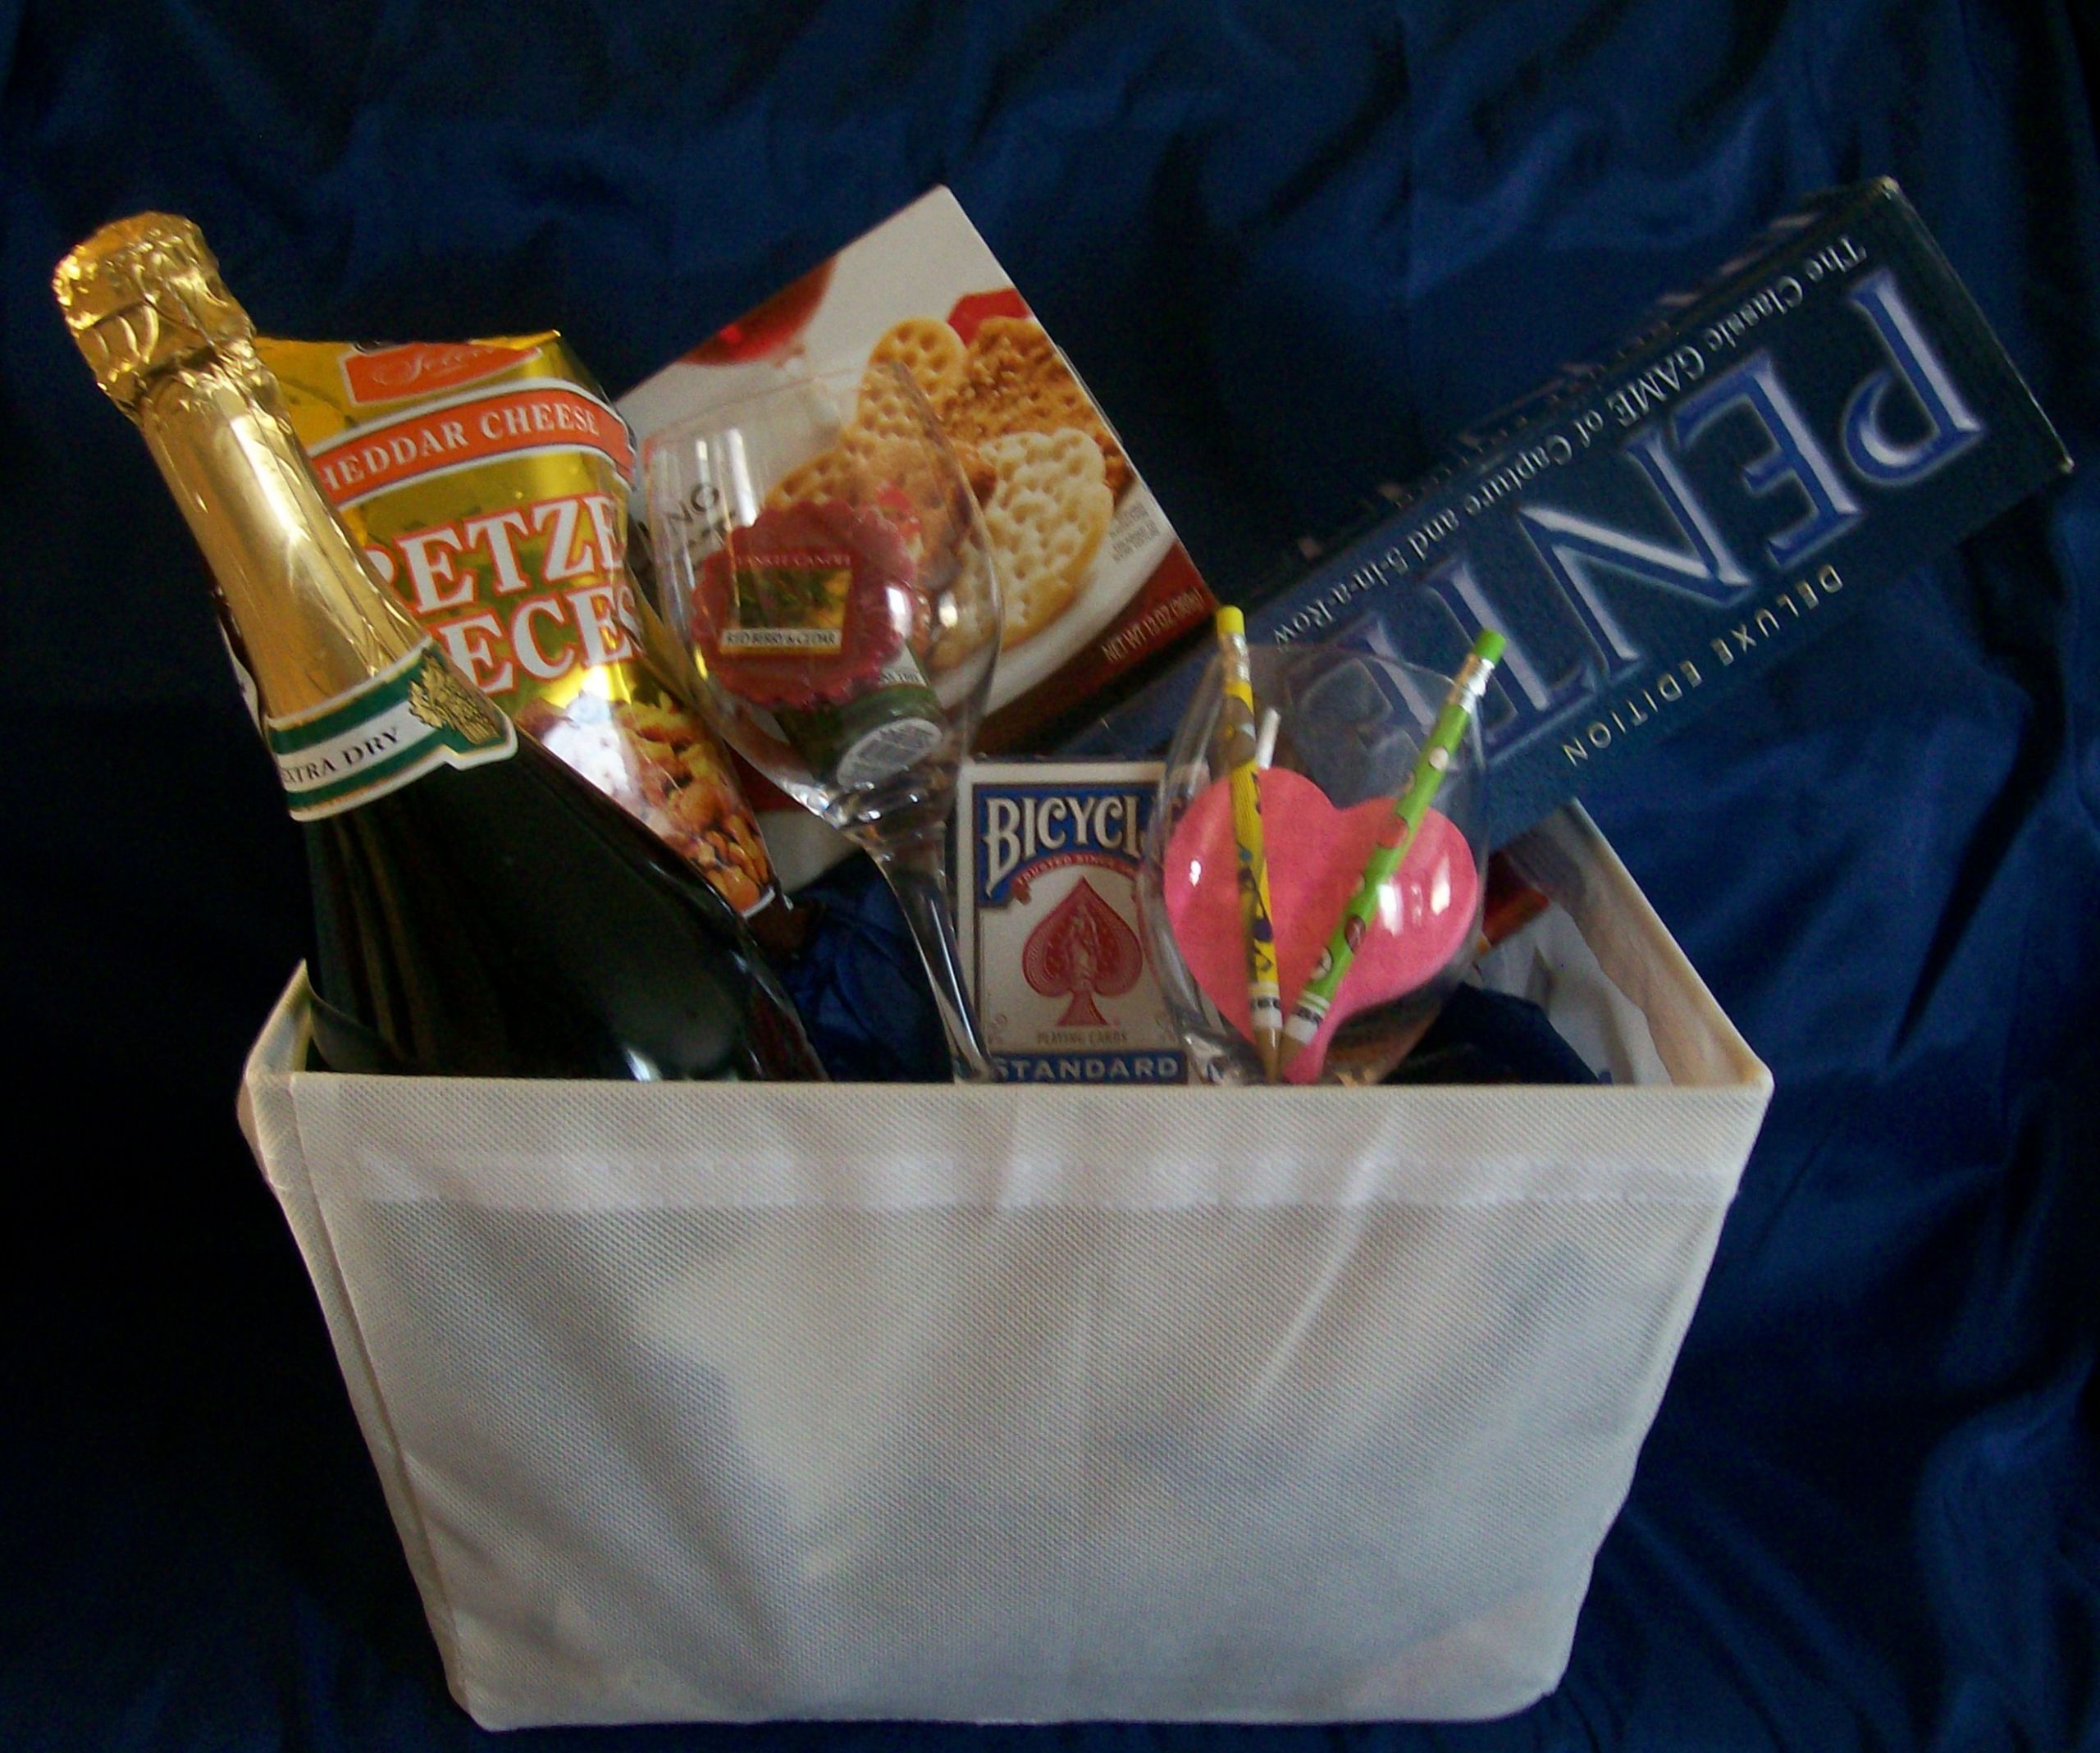 Gift Baskets For Couples Ideas
 Game Gift Basket Ideas for a Couple – All About Fun and Games